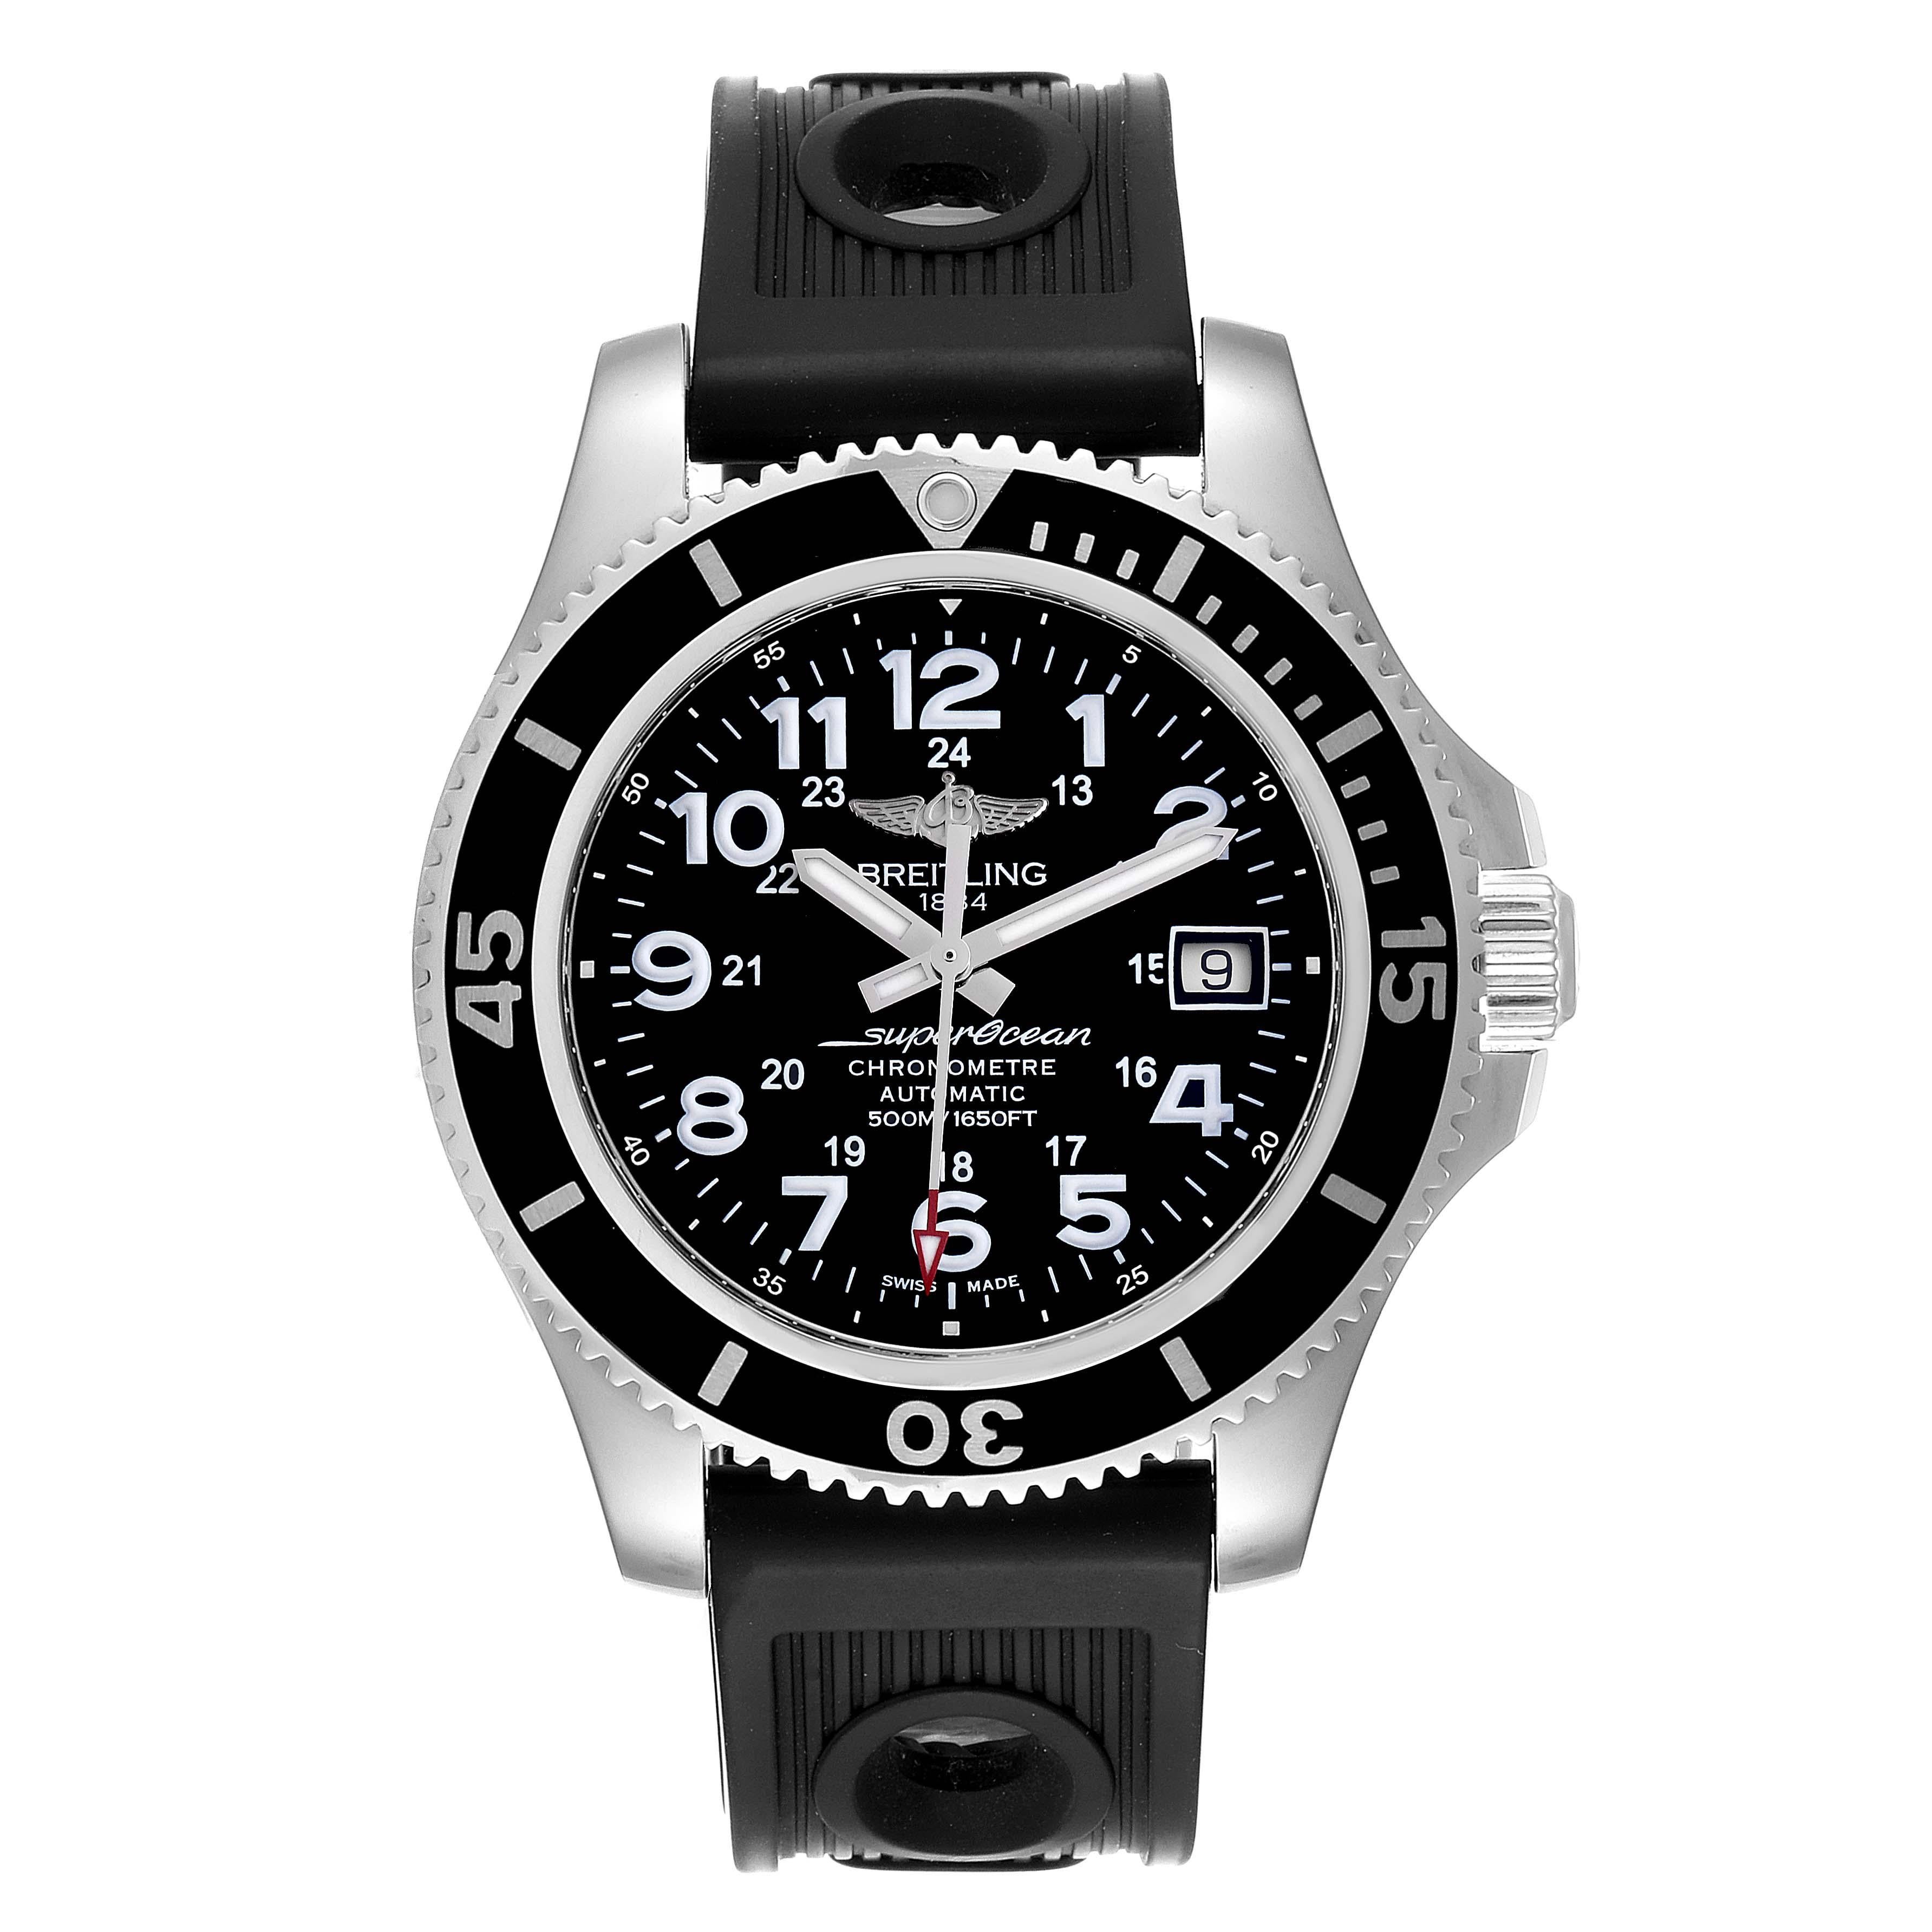 Breitling Superocean II Black Dial Steel Mens Watch A17365 Box Card. Authomatic self-winding movement. Stainless steel case 42 mm in diameter. Stainless steel screwed-down crown and pushers. Black unidirectional revolving bezel. 0-60 elapsed-time.